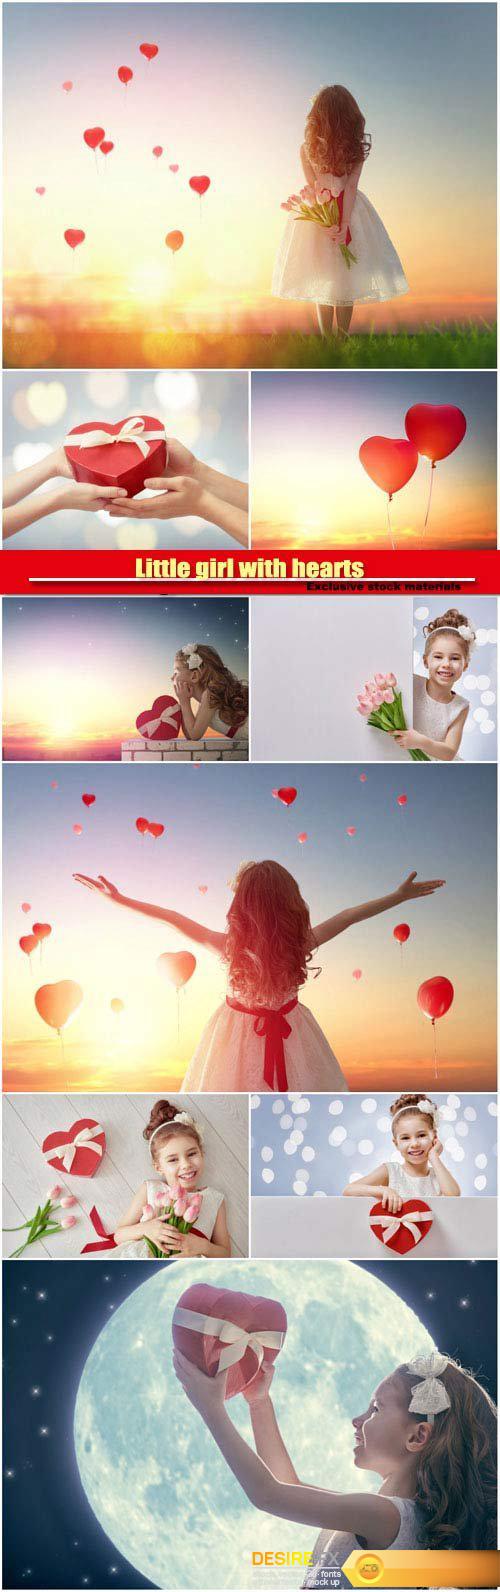 Little girl with hearts